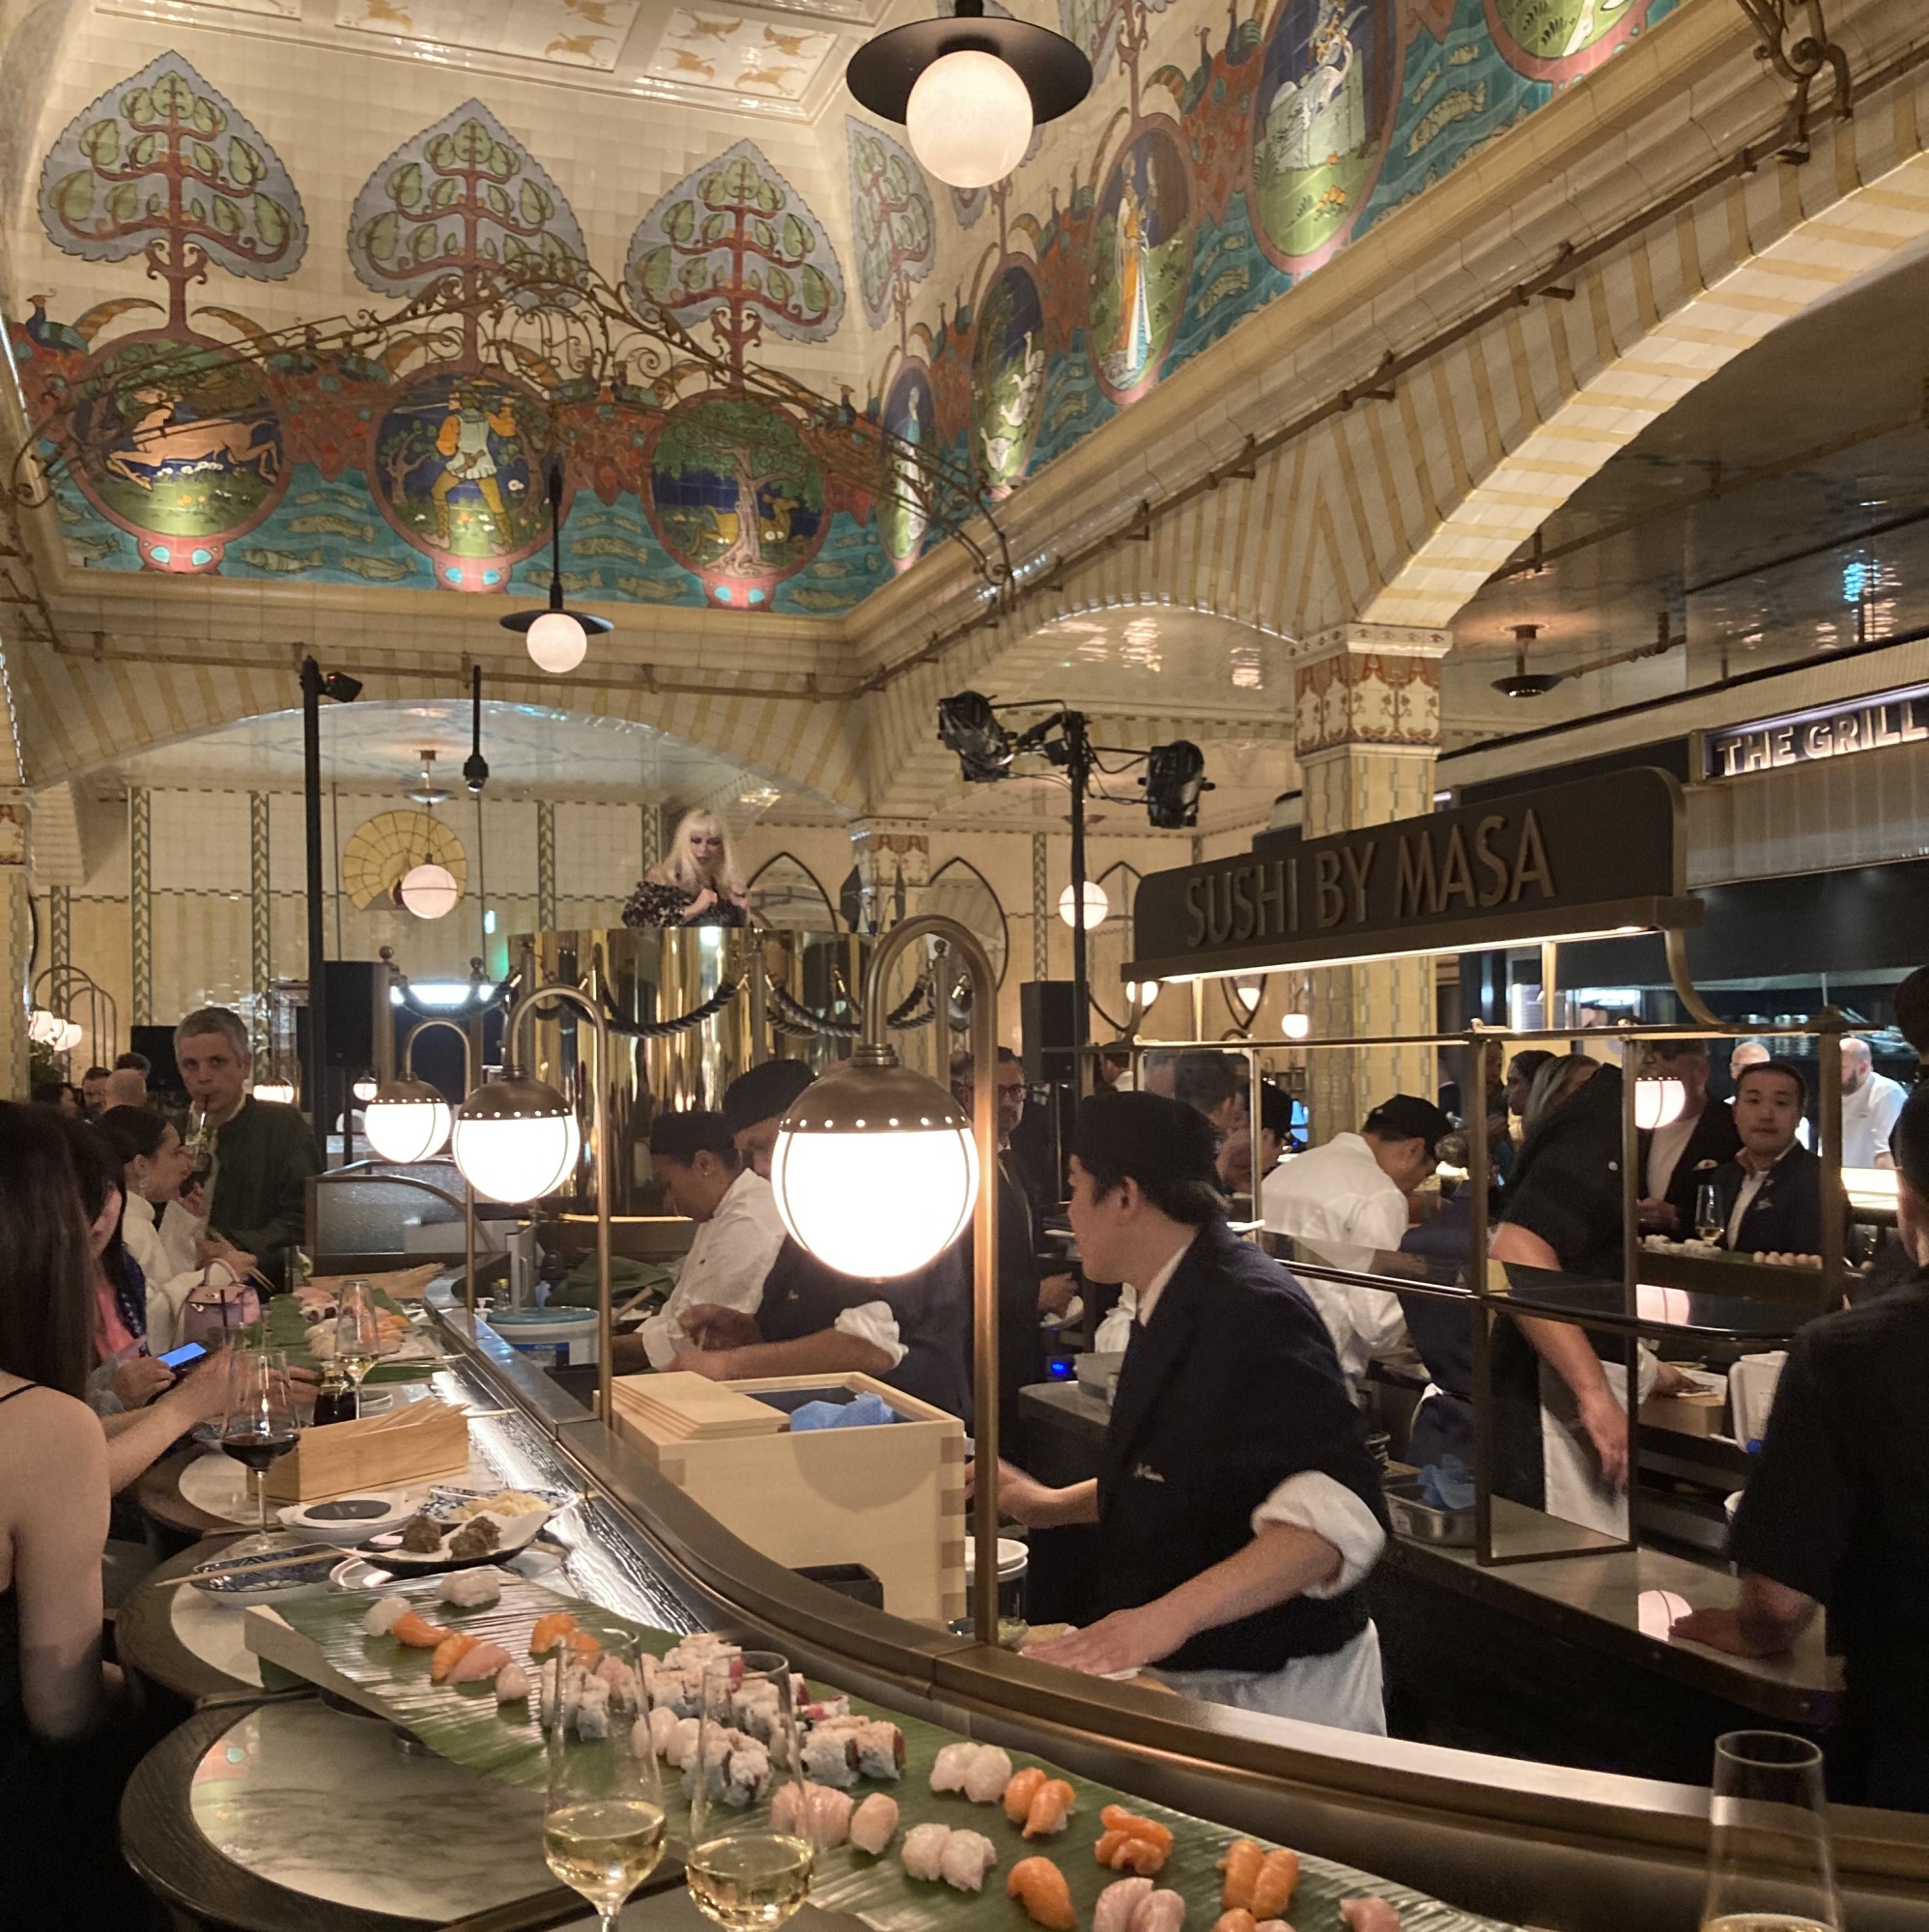 Harrods Dining Hall Is Expensive But Offers a Business Model That's ...